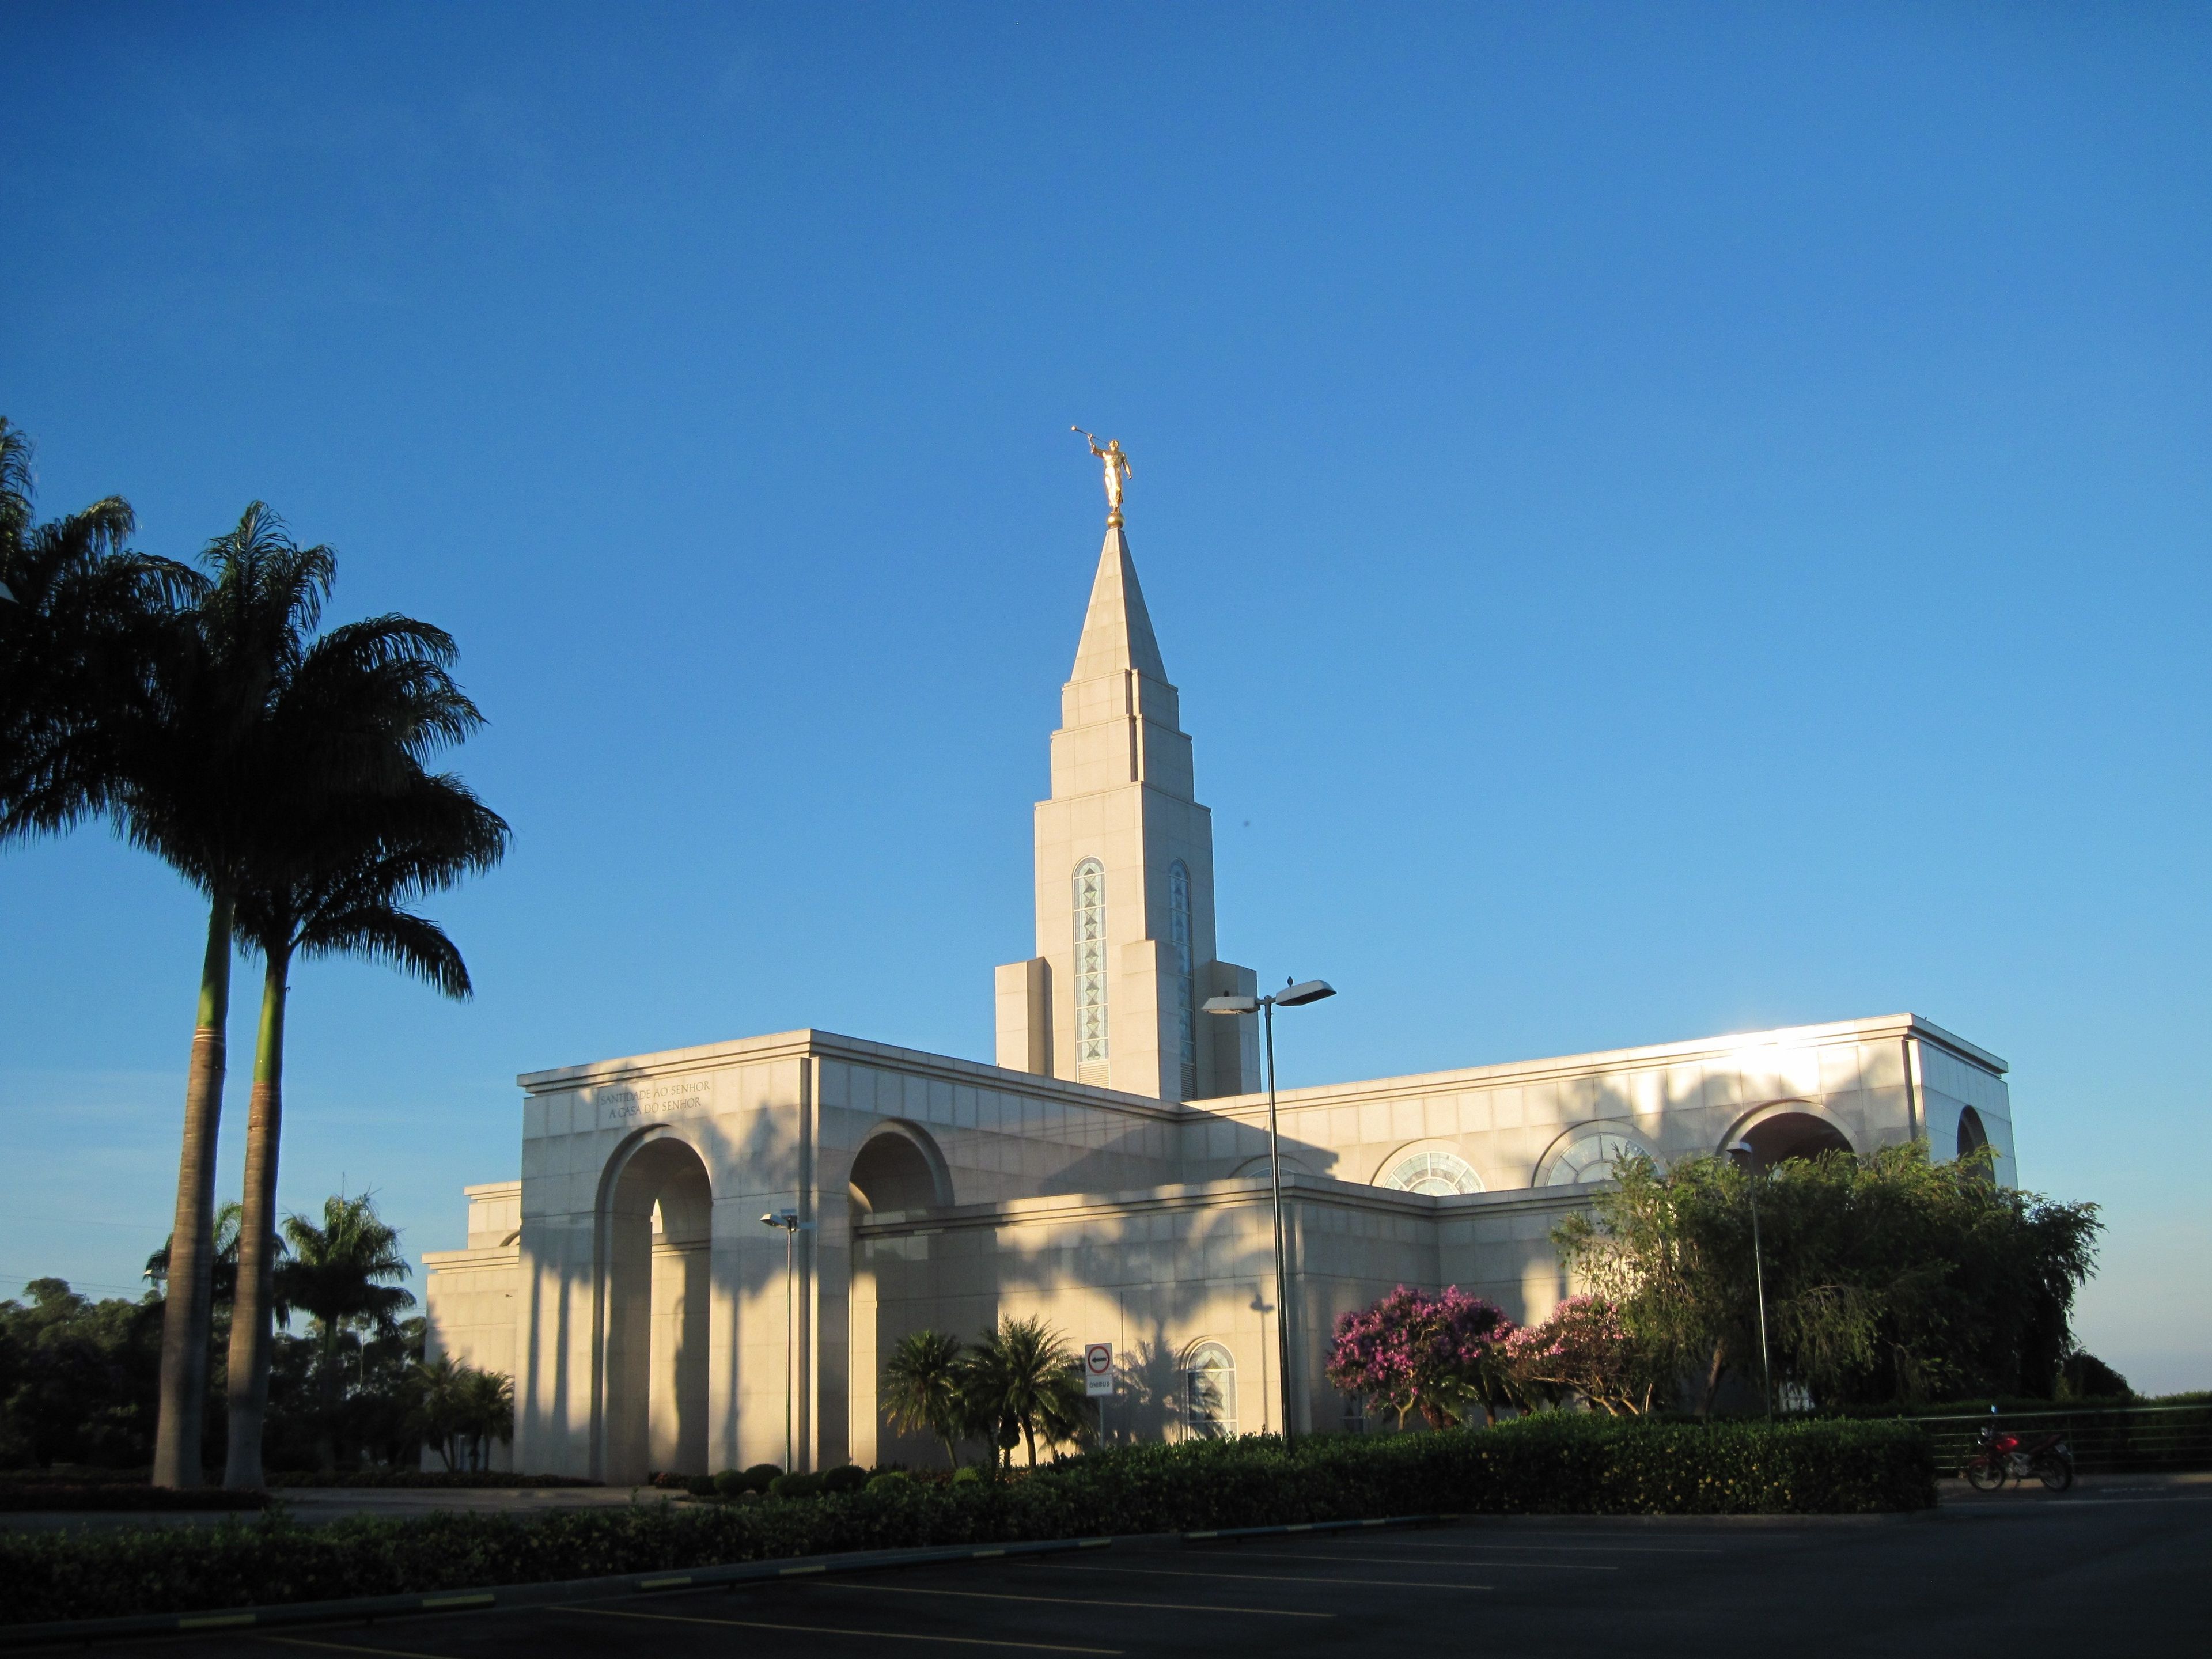 A view of the Campinas Brazil Temple during the day.